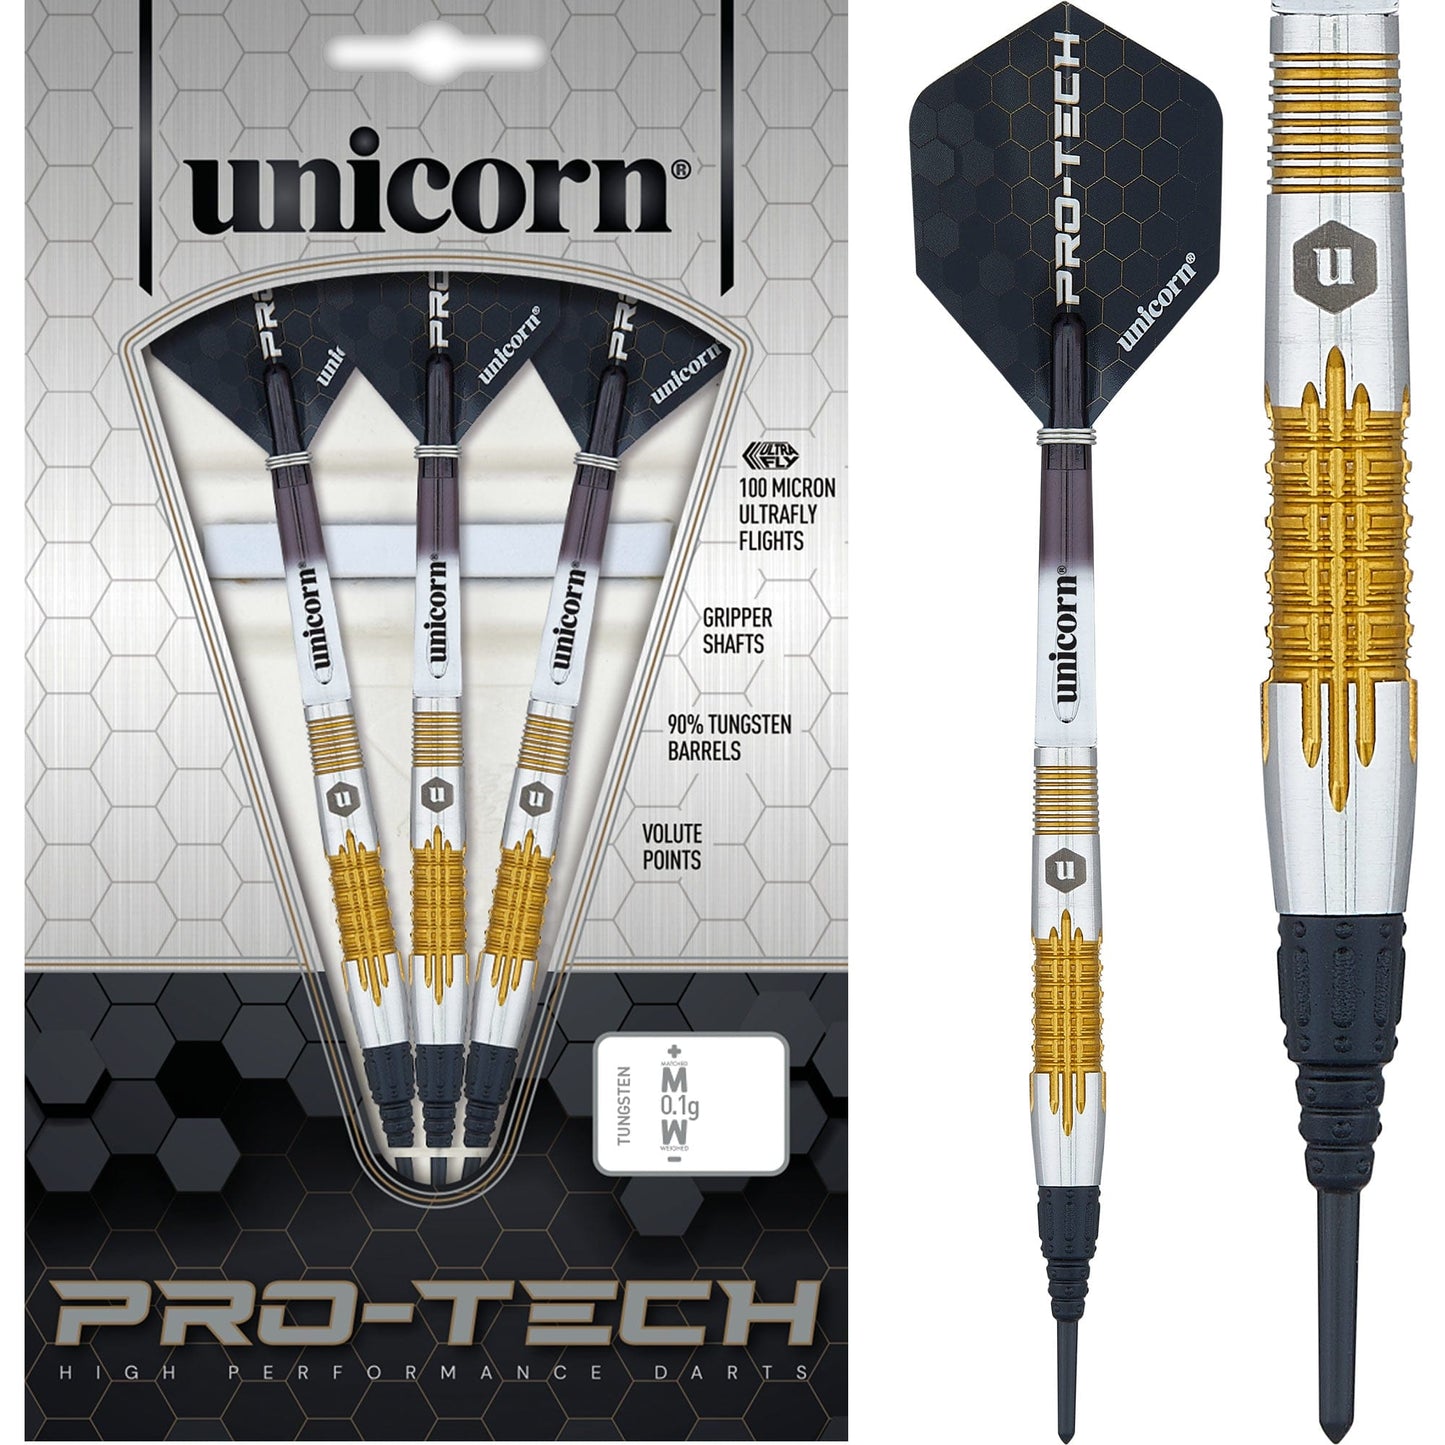 Unicorn Protech Darts - Style 1 - Soft Tip - Gold Ring 17g